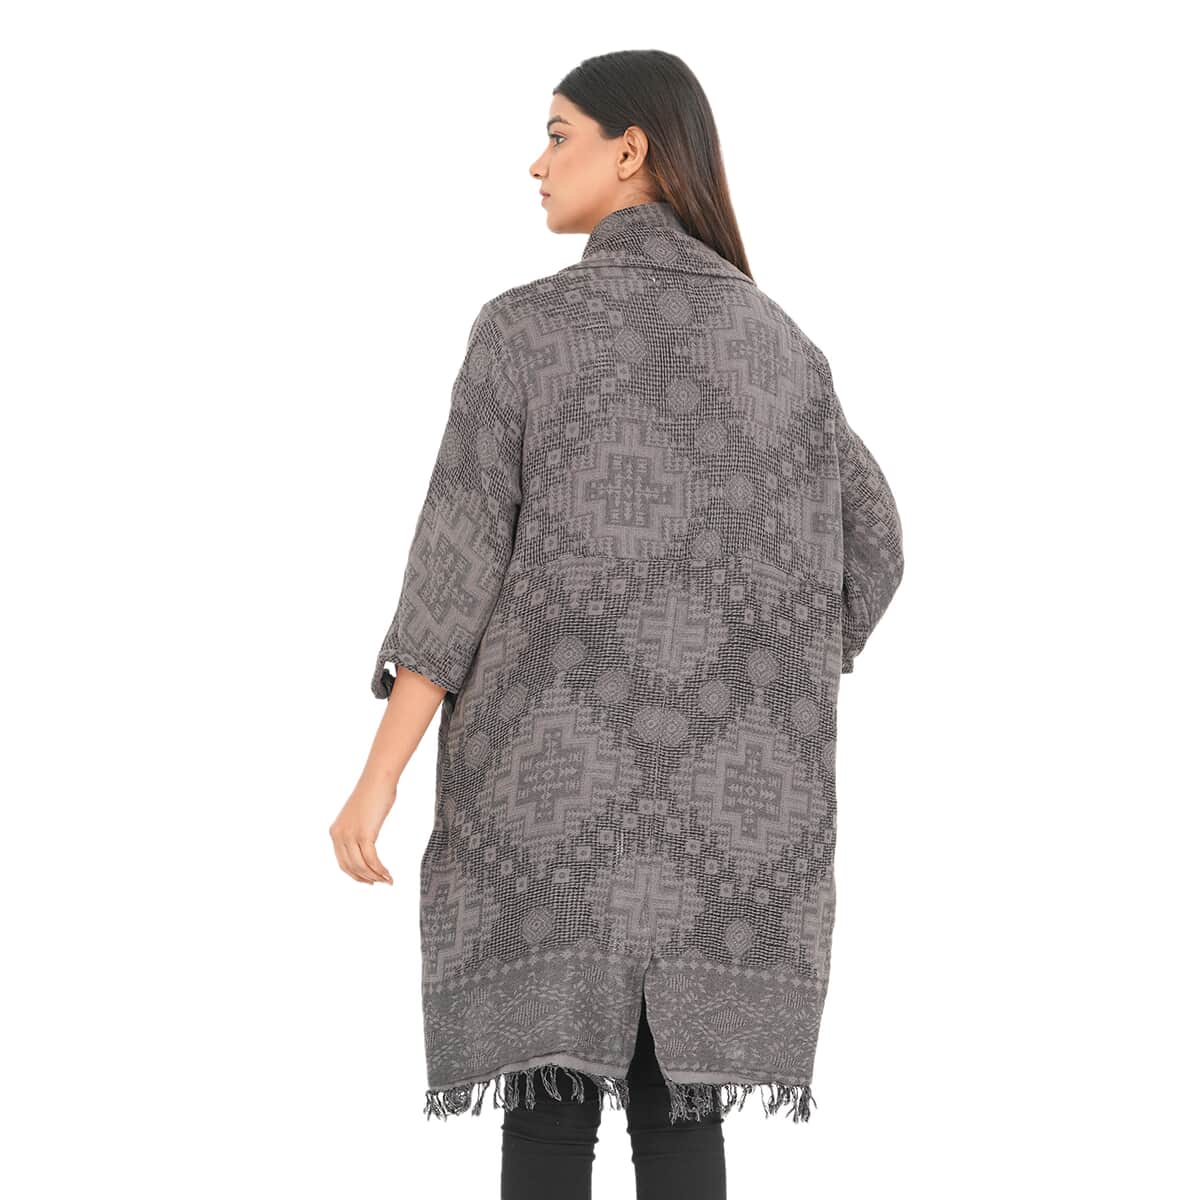 Passage Gray 100% Cotton Double Layer Jacquard Front Waterfall Cardigan - One size Missy, Cotton Cardigan, Women Cardigan, Maxi Cardigan, Summer Cardigan image number 1